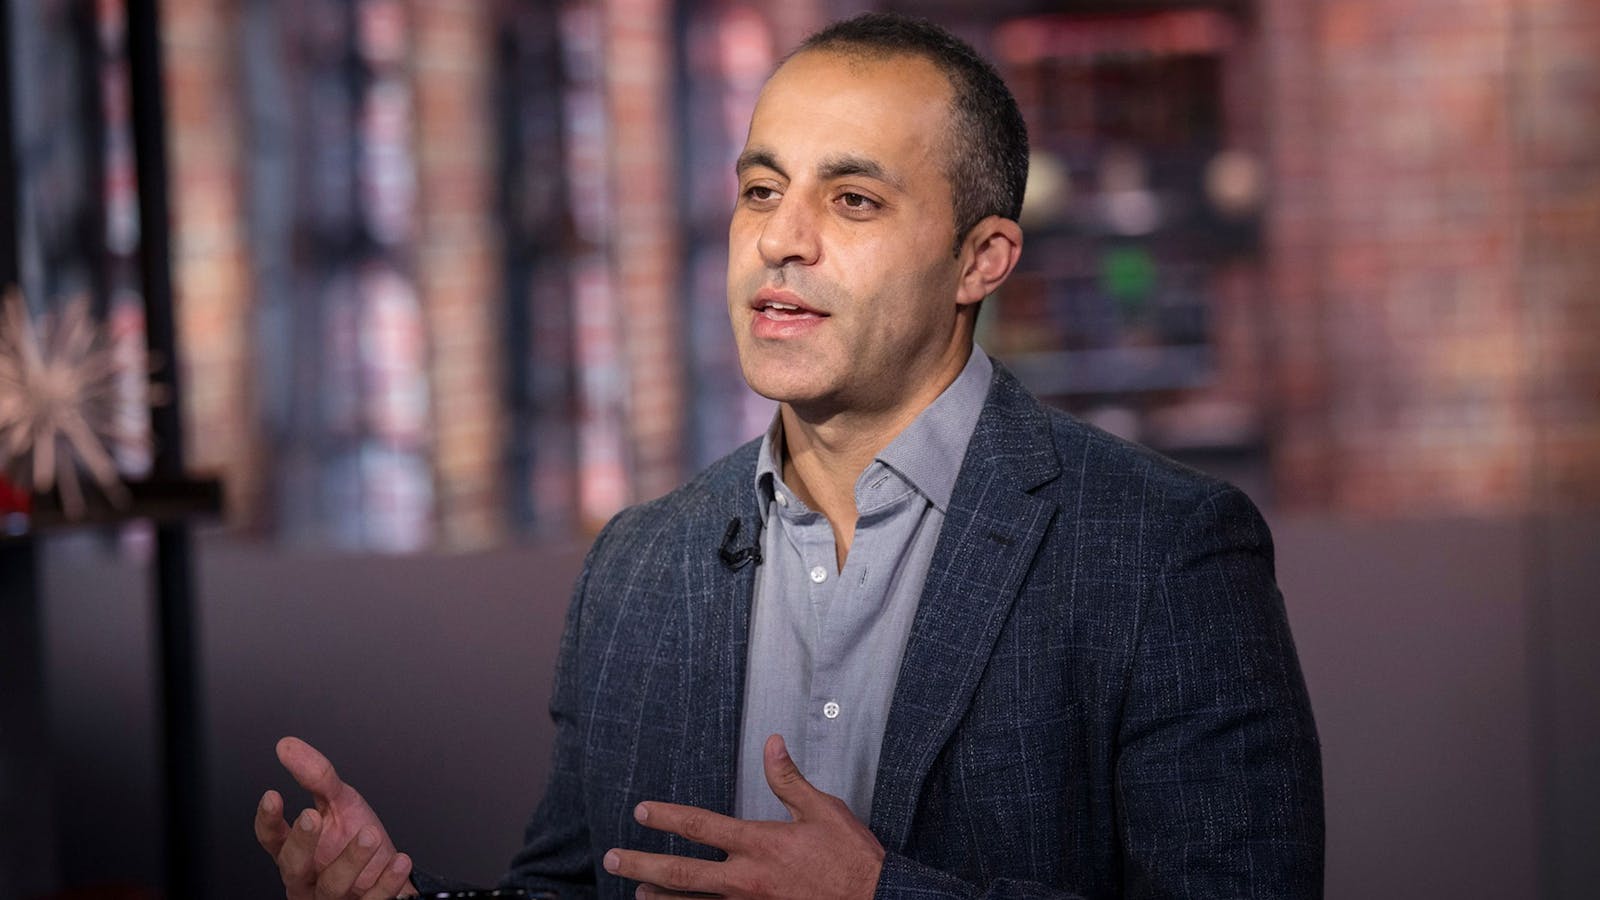 Ali Ghodsi, co-founder and CEO of Databricks. Photo by Bloomberg.